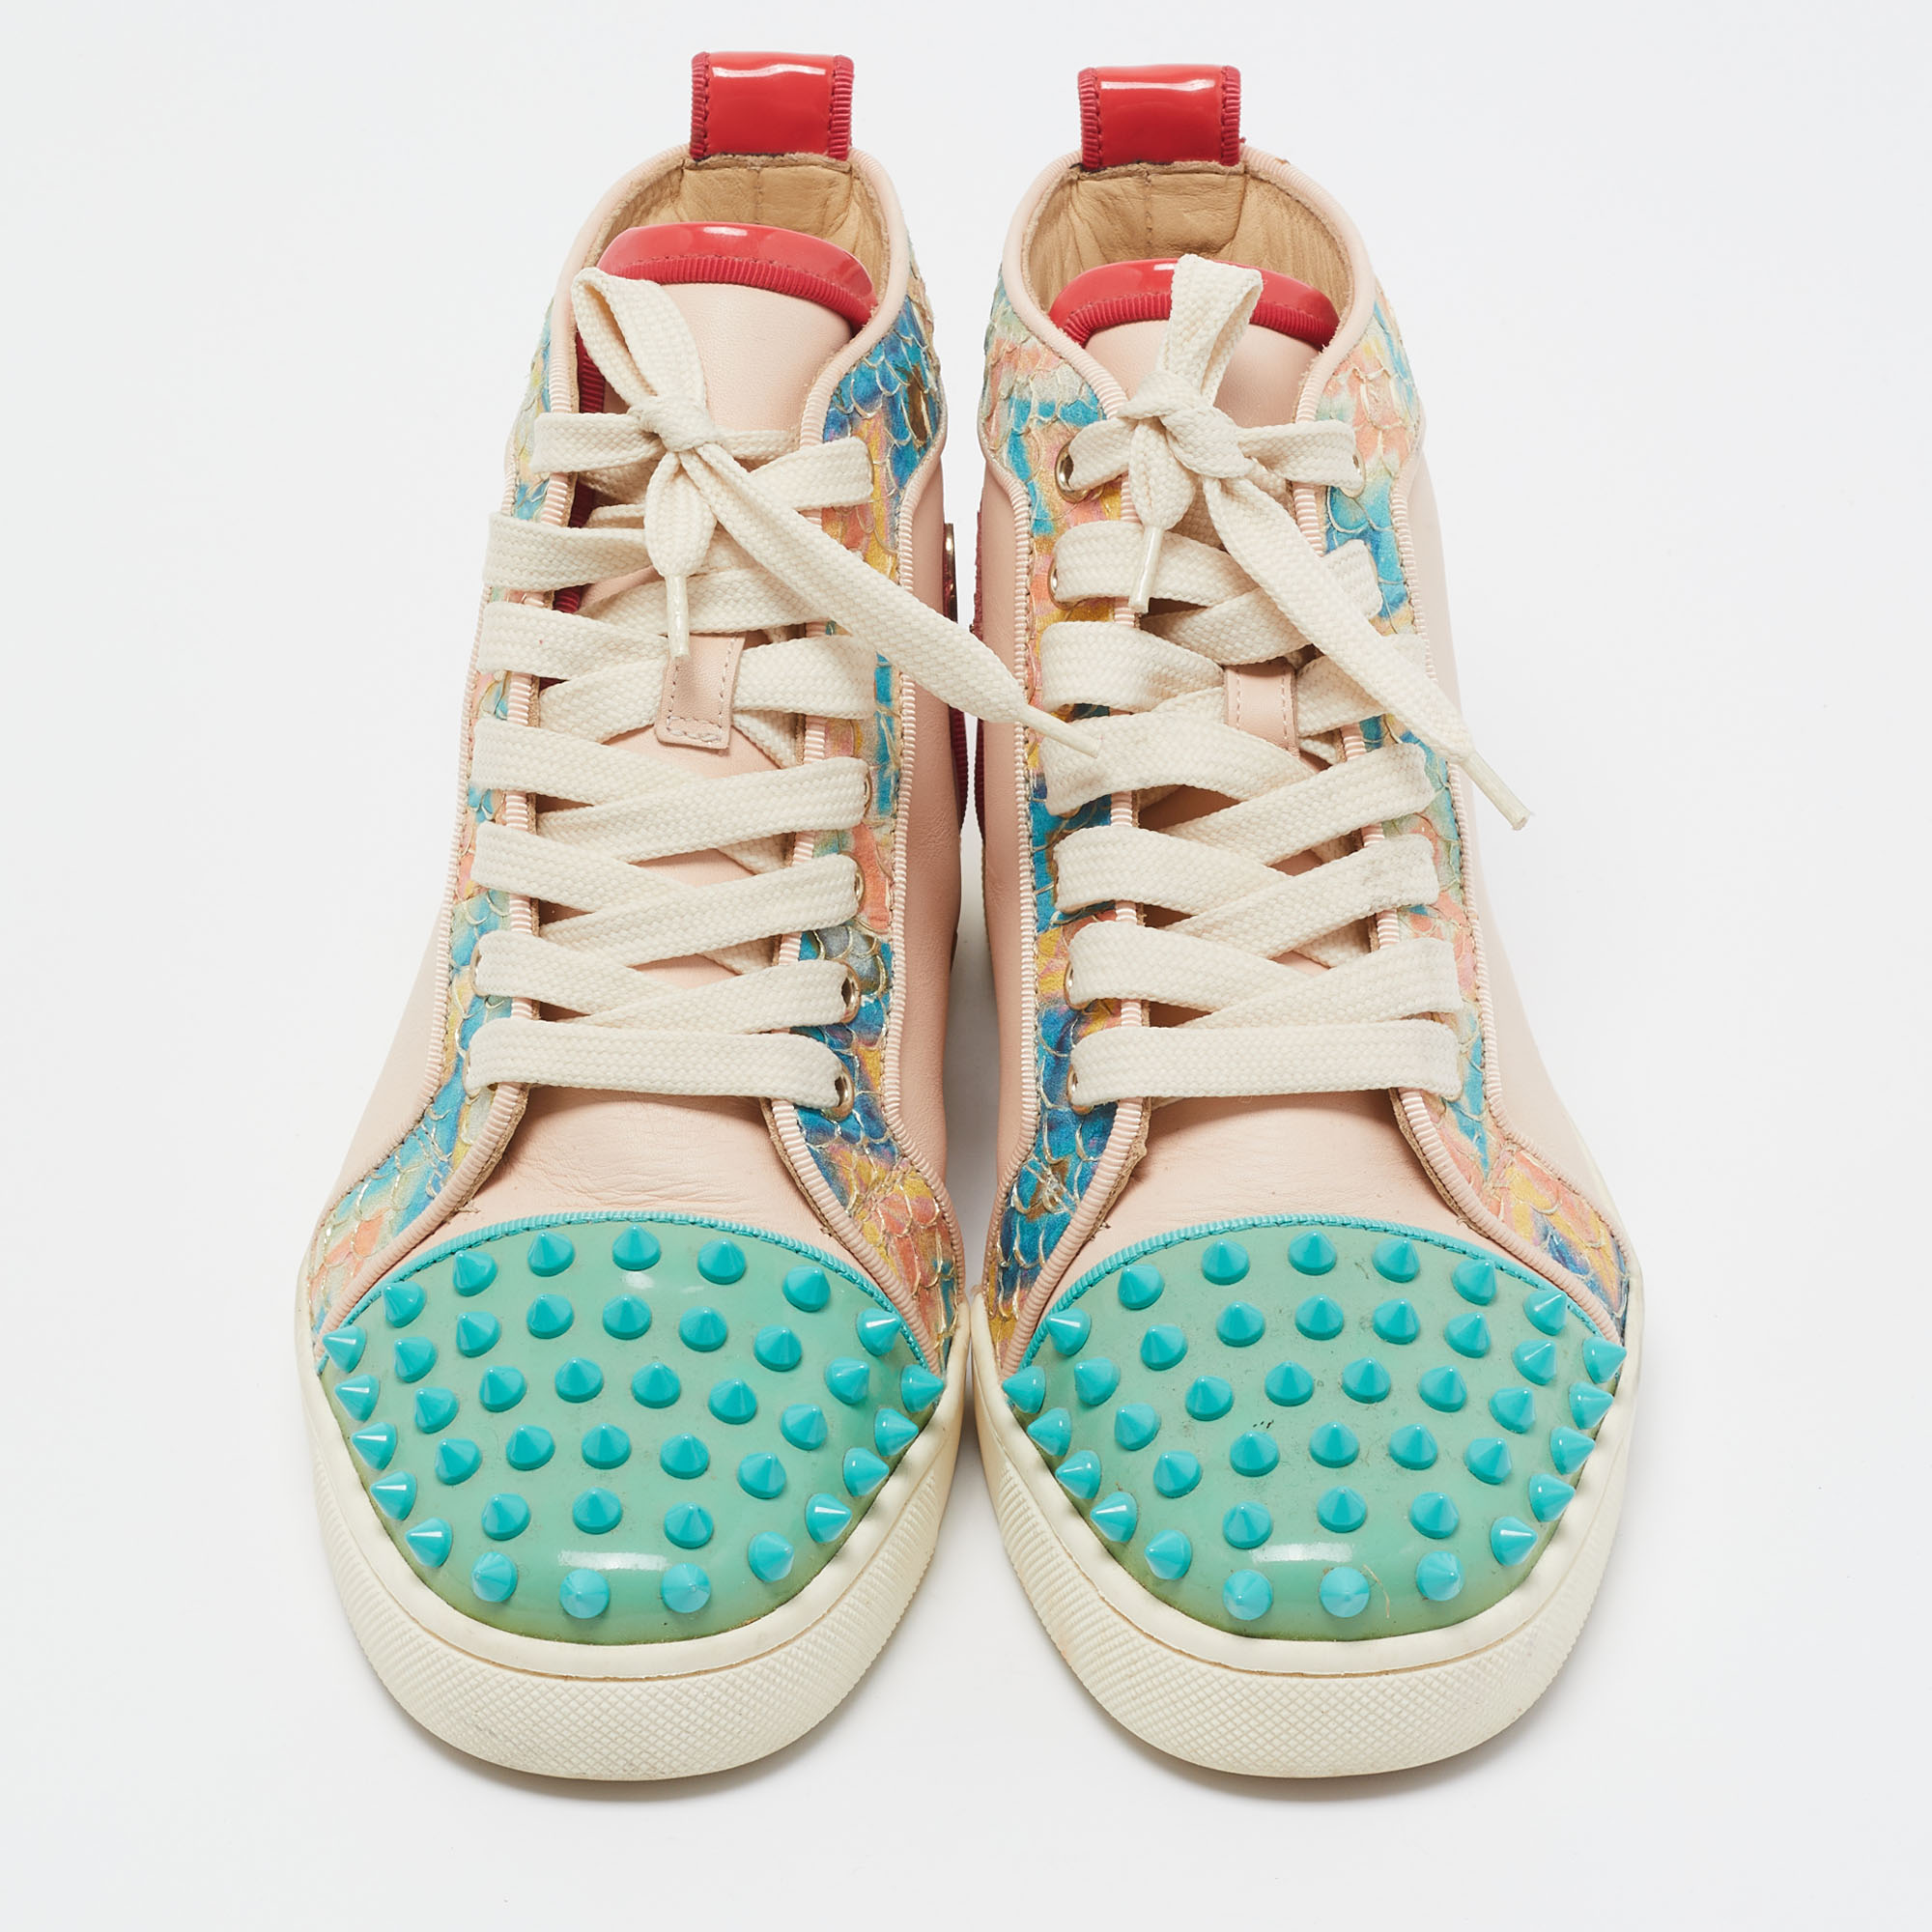 Christian Louboutin Multicolor Patent And Leather Louis Spikes High Top Sneakers Size 36.5